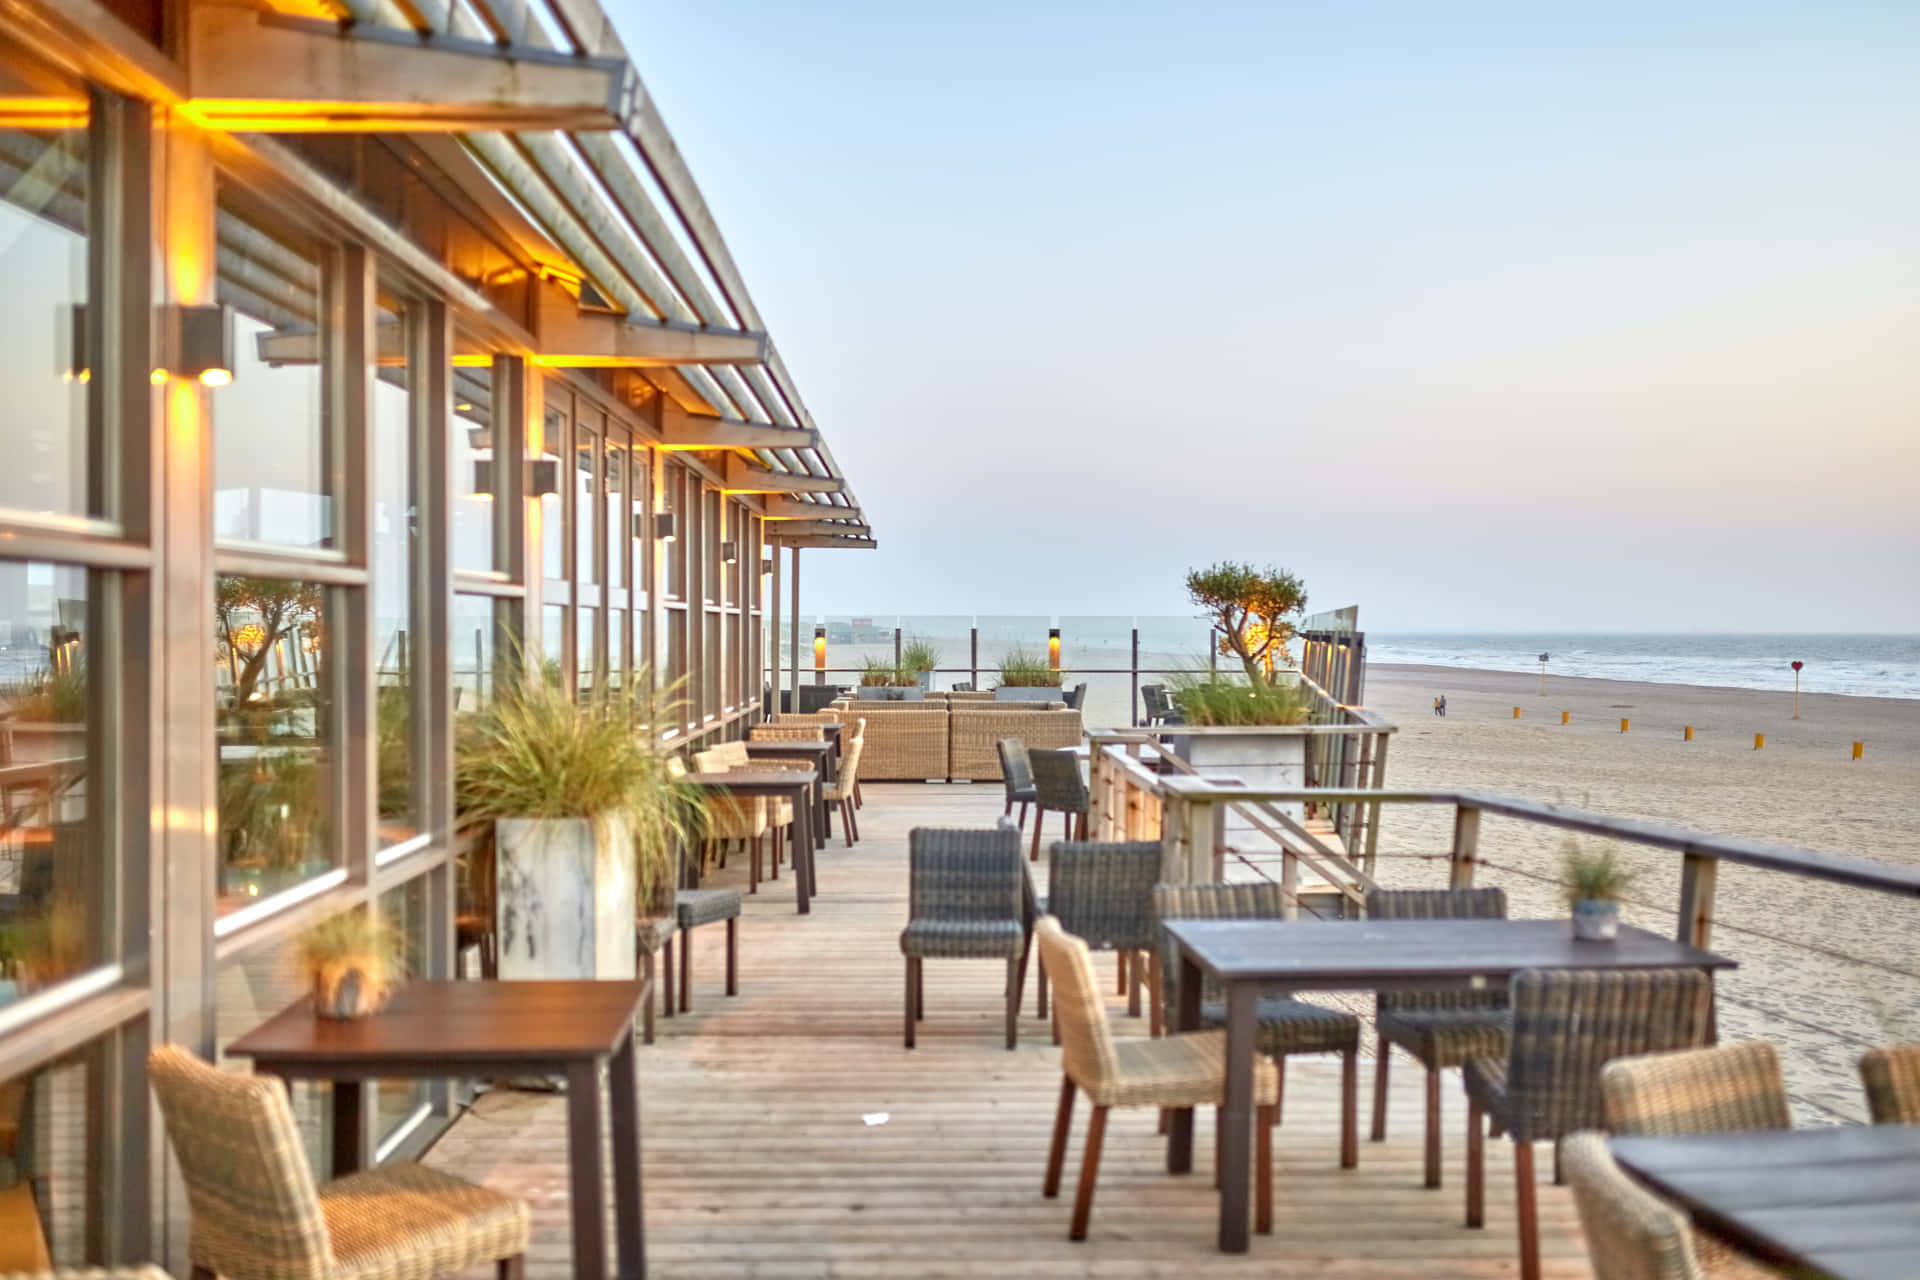 A Restaurant With Tables And Chairs On The Beach